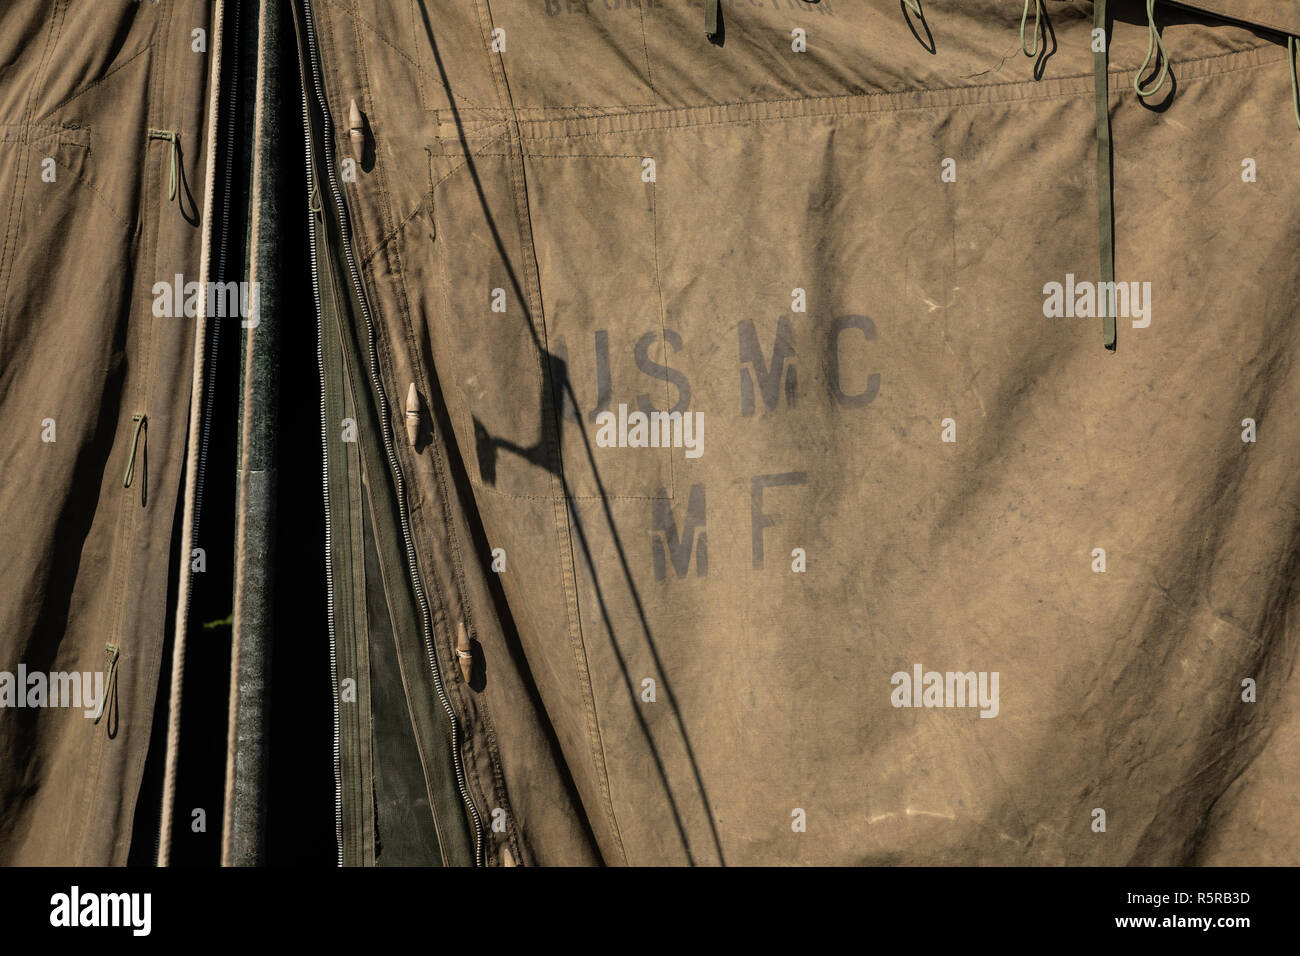 Green military tent with USMC initials (United States Marine Corps) Stock Photo